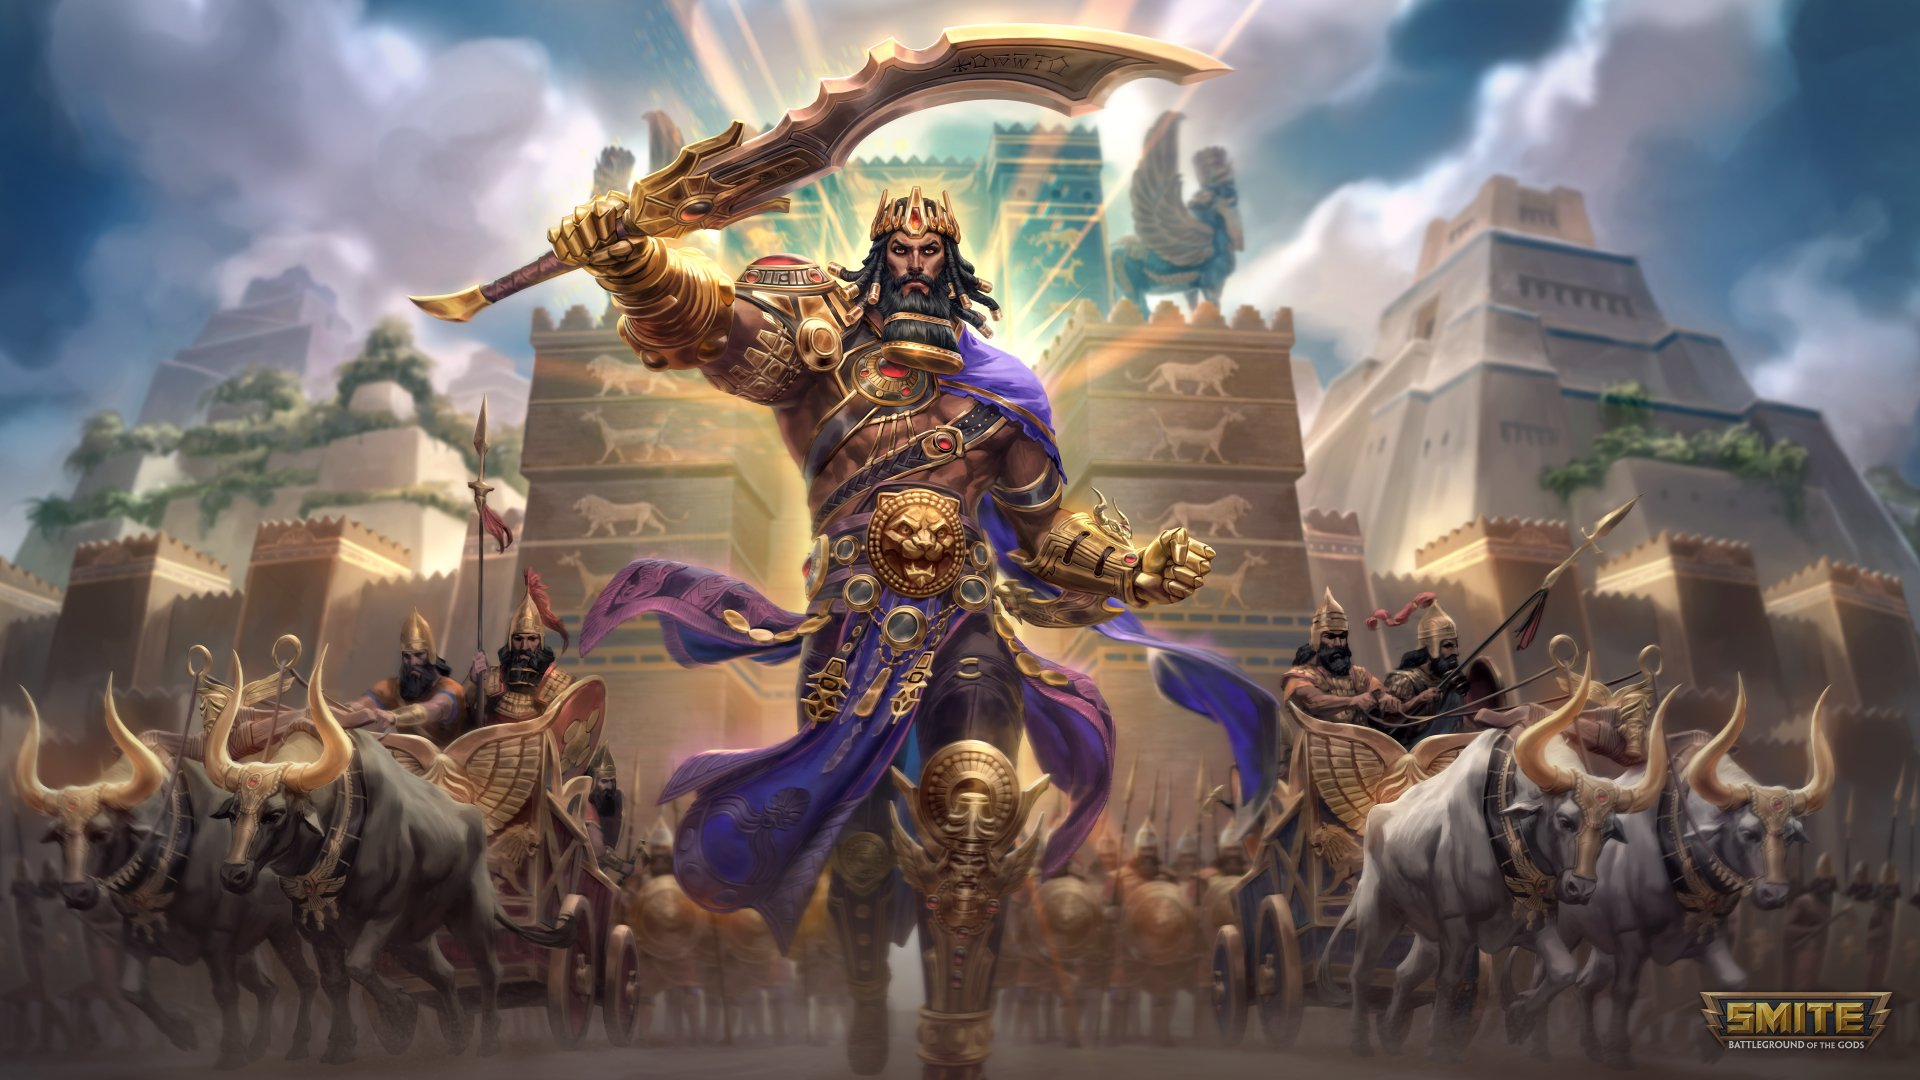 1920x1080 670+ 4K Ultra HD Smite Wallpapers | Background Images